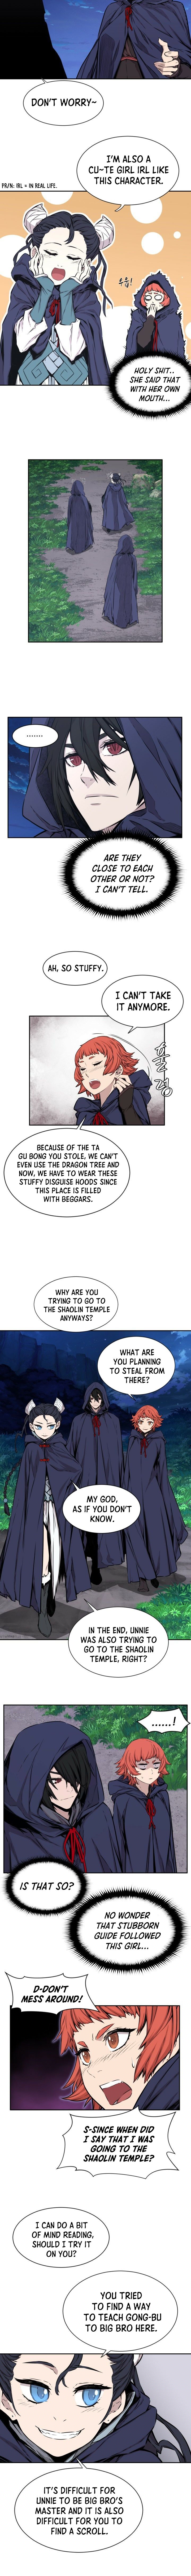 Legend of Mir: Gold Armored Sword Dragon Chapter 14 page 4